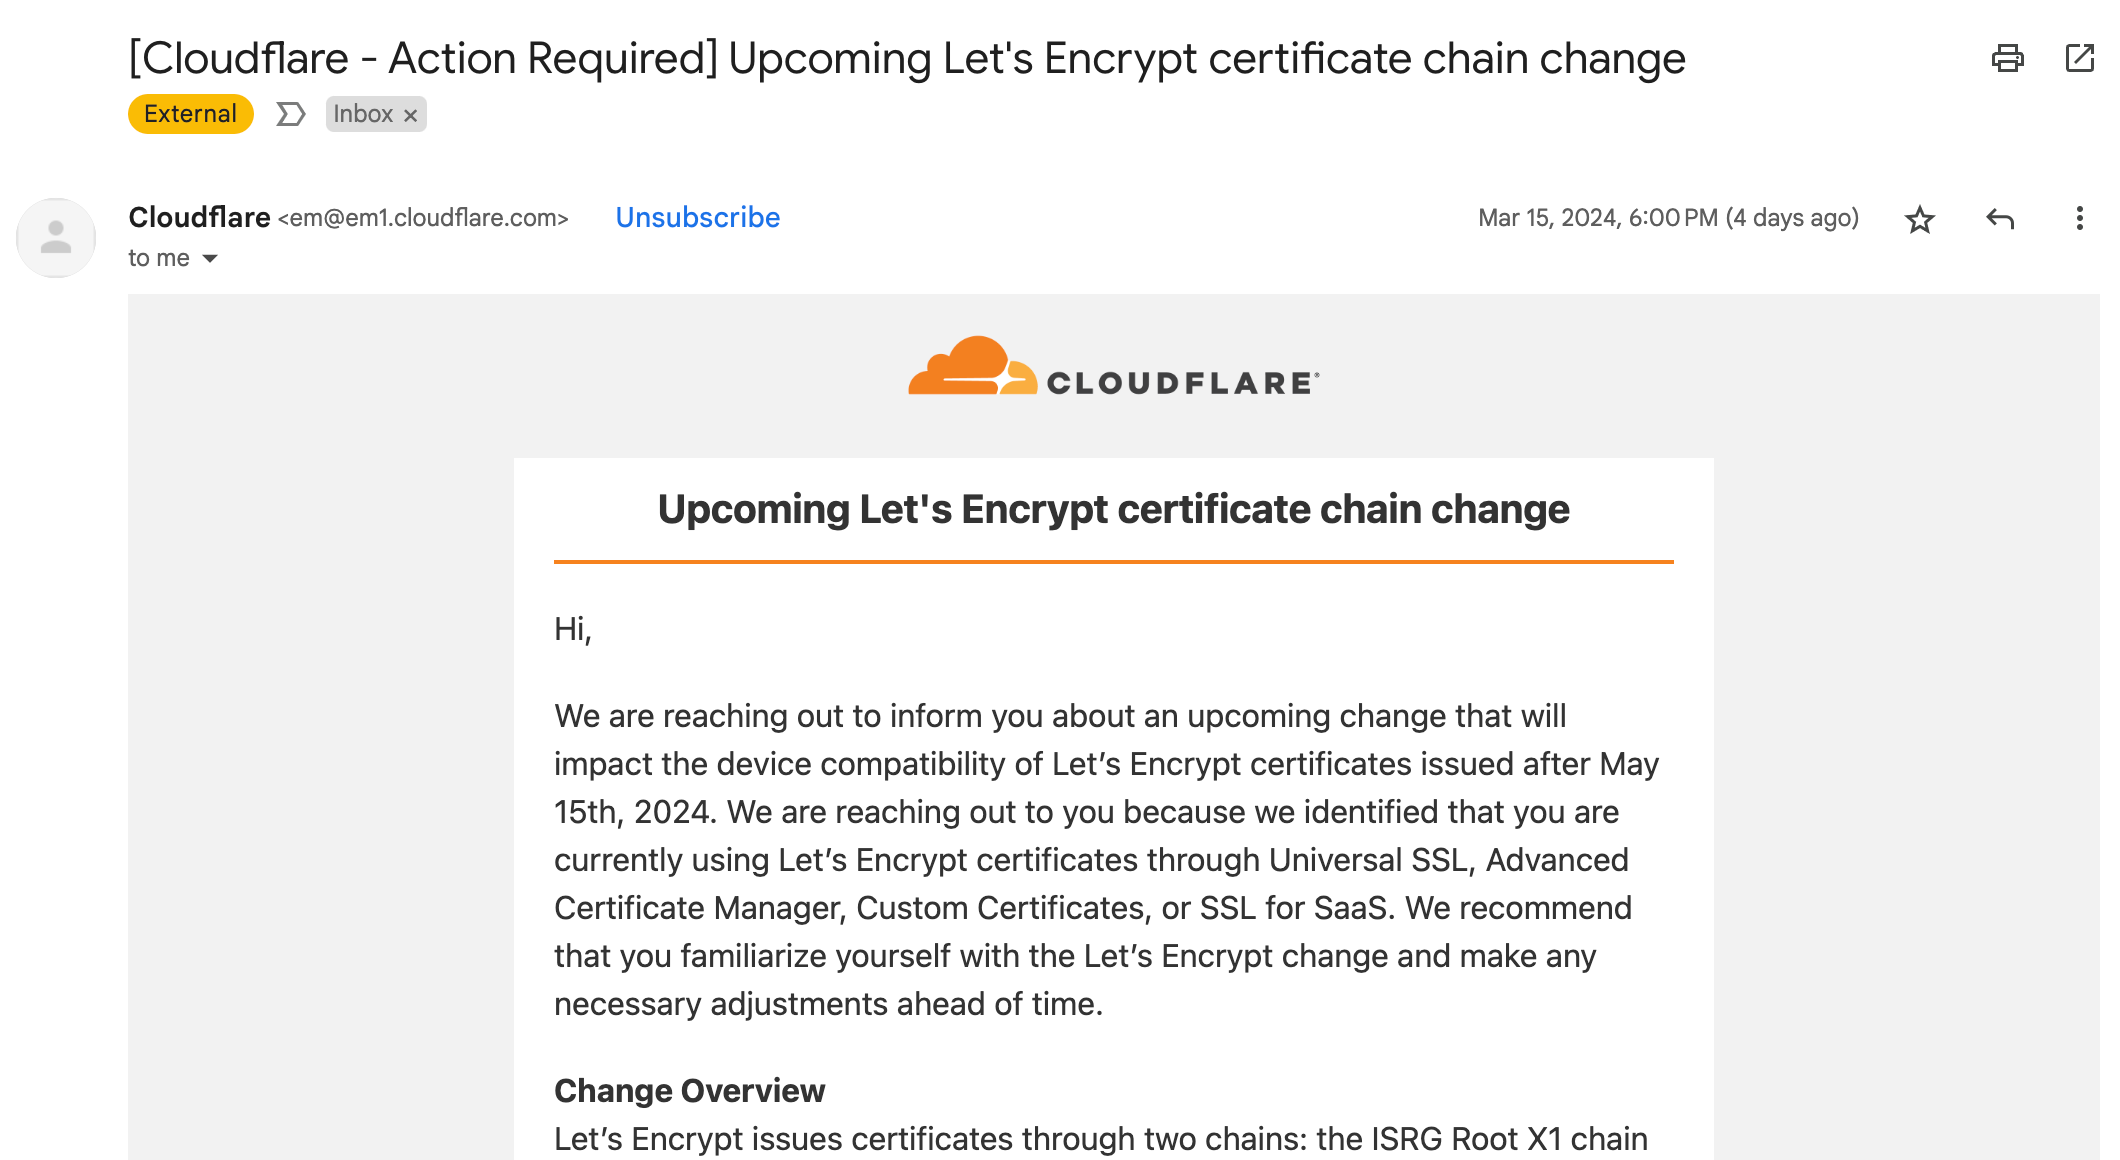 Solving Cloudflare's Action Required Upcoming Let's Encrypt Certificate Chain Change Email